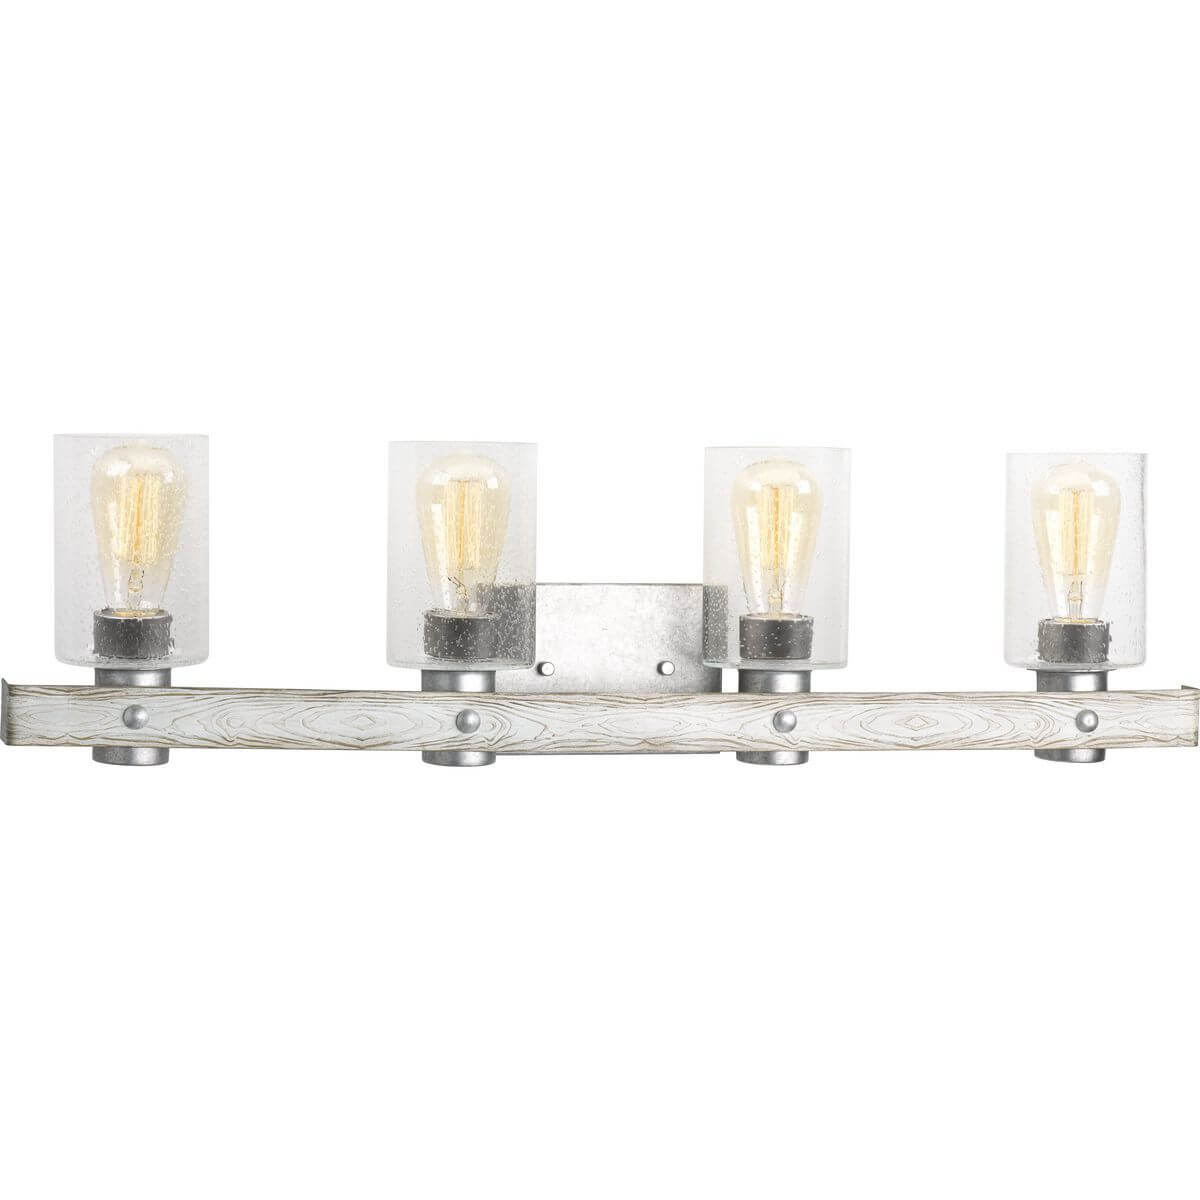 Progress Lighting Gulliver 4 Light 33 inch Bath Vanity Light in Galvanized with Clear Seeded Glass P300126-141